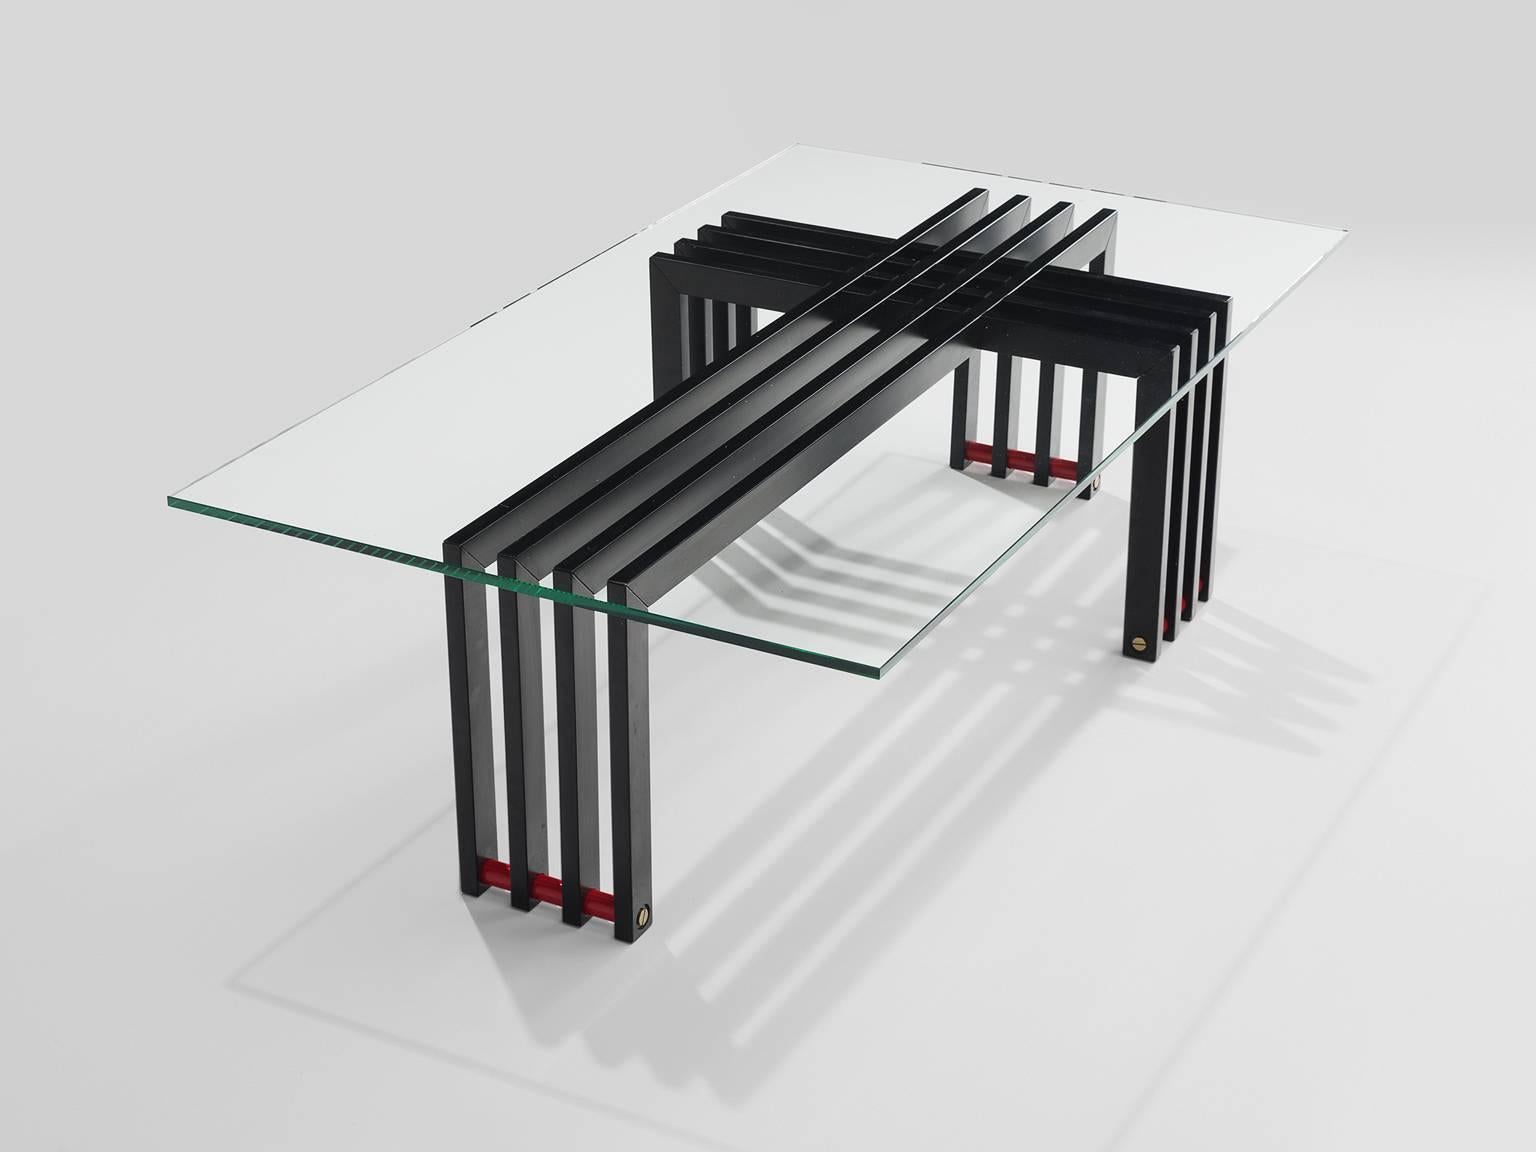 Coffee table with glass and steel, Europe, 1970s.

This sculptural coffee table with transparent glass top and geometric frame and horizontal red slats as a foot. Four iron slats bend form a cross with another four slats of metal. This sculptural